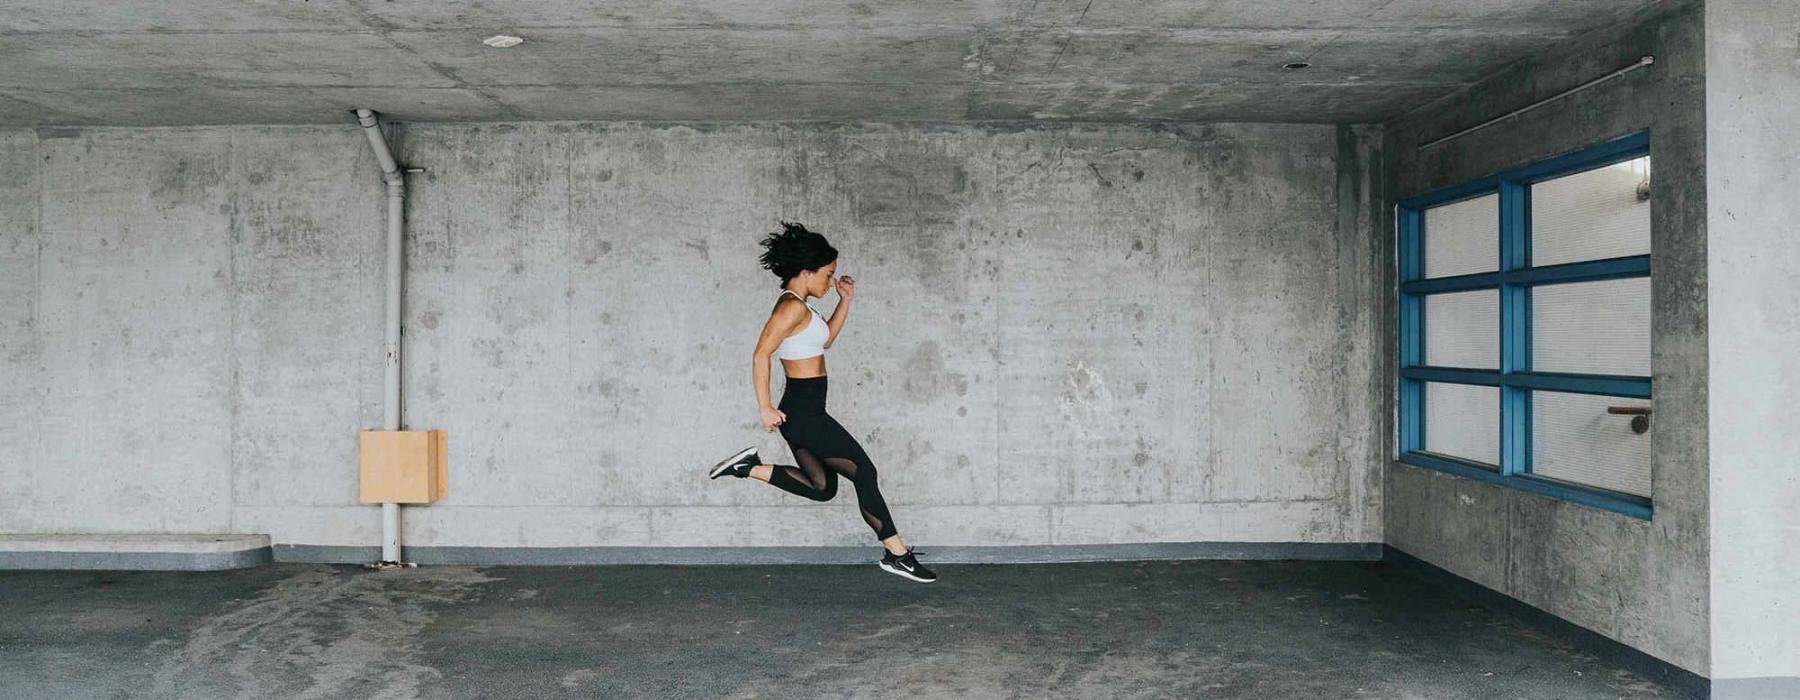 exercising woman caught jumping in mid-air